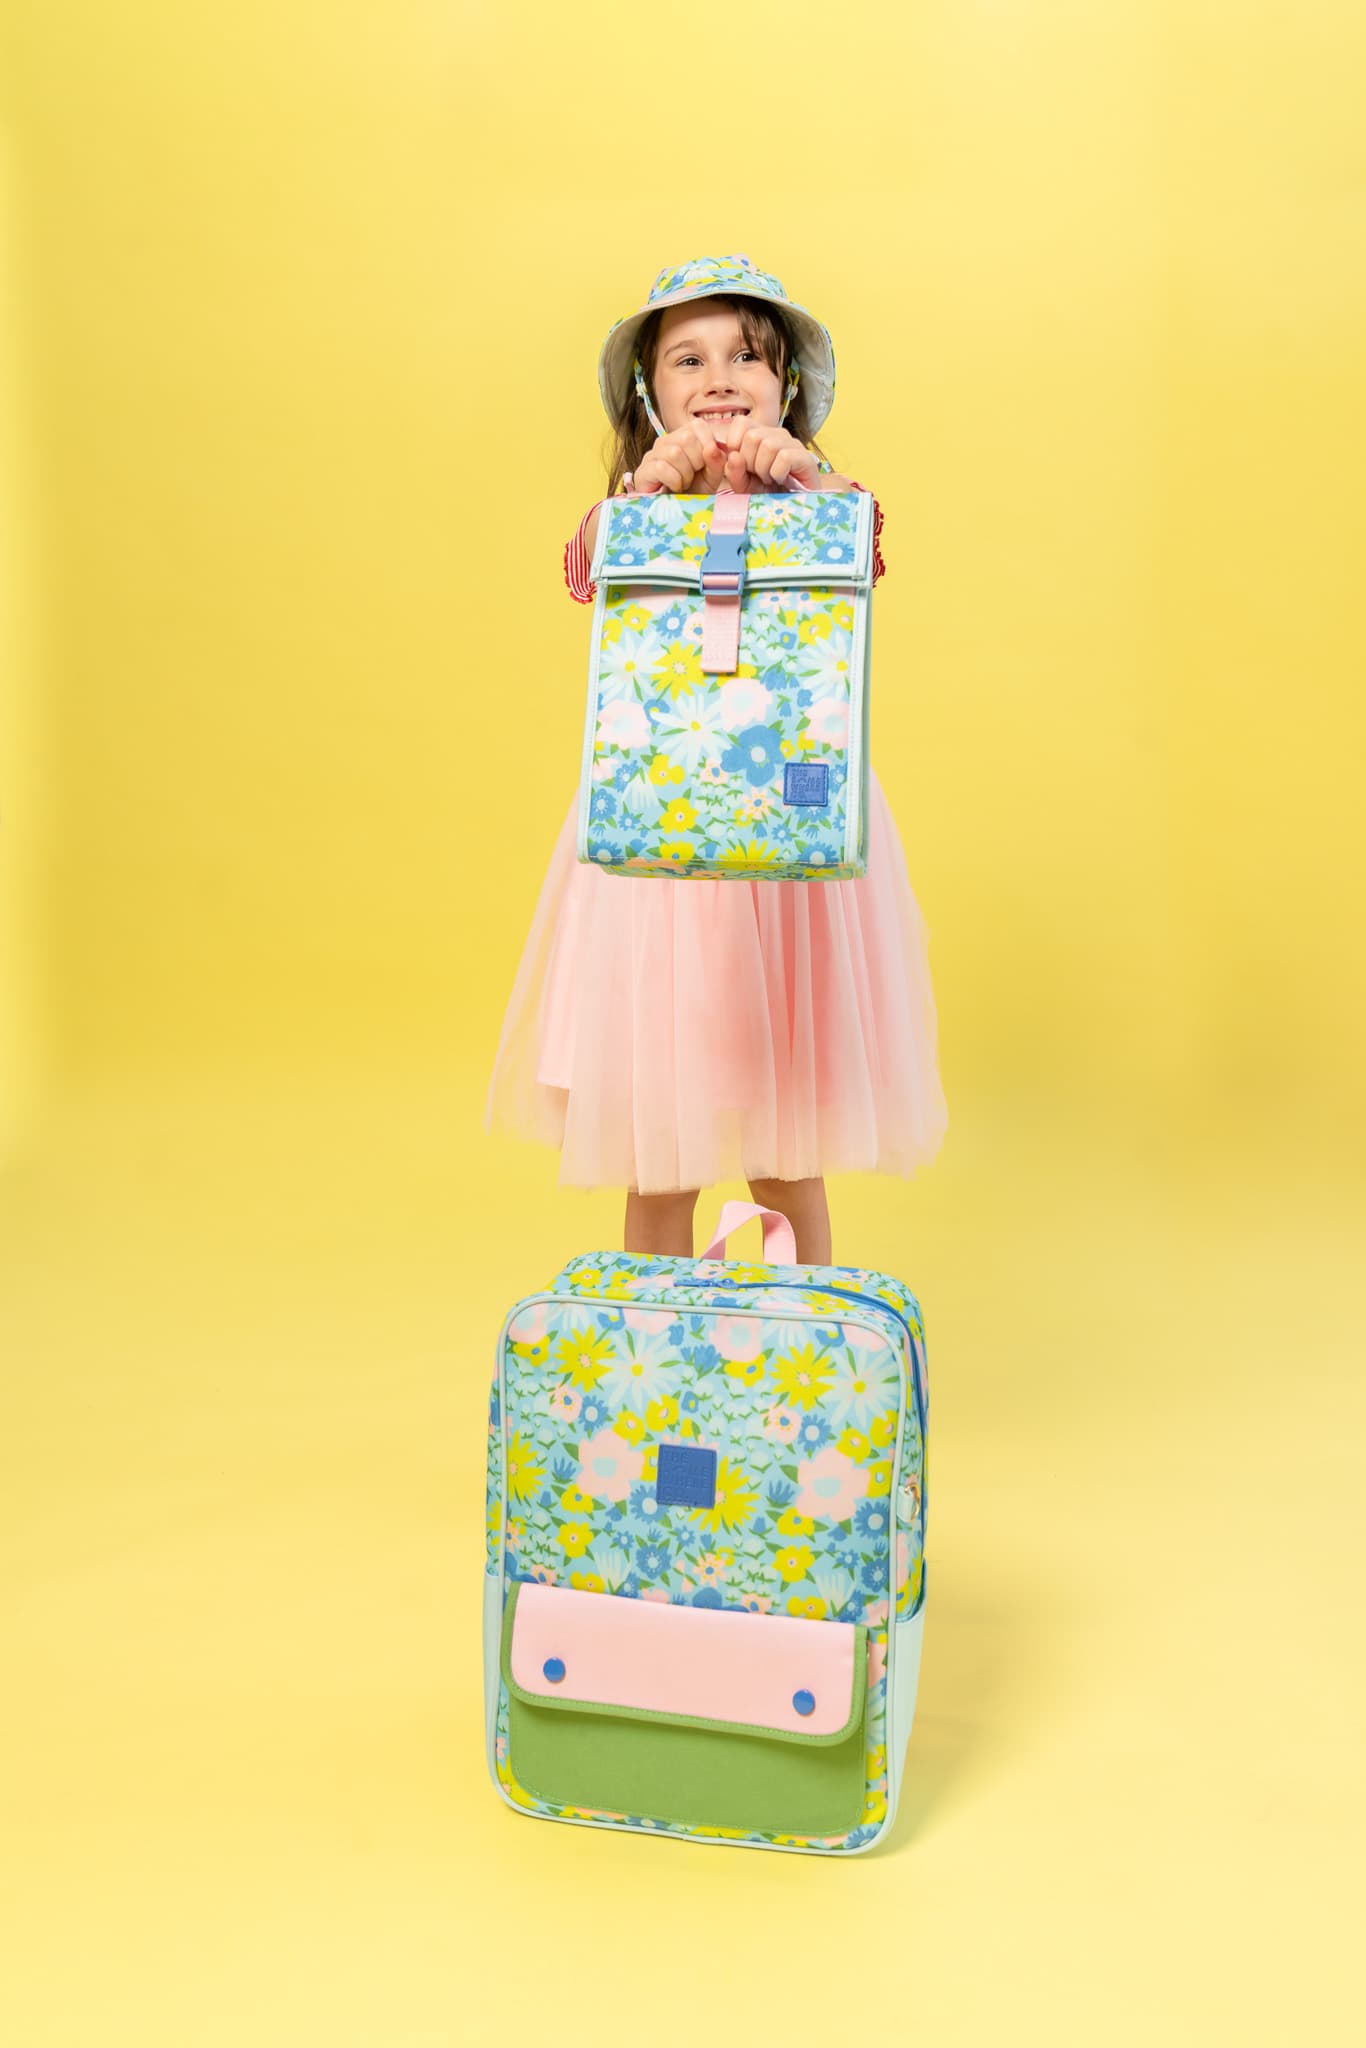 The Somewhere Co - Posy Skies Adventure Backpack and lunch satchel